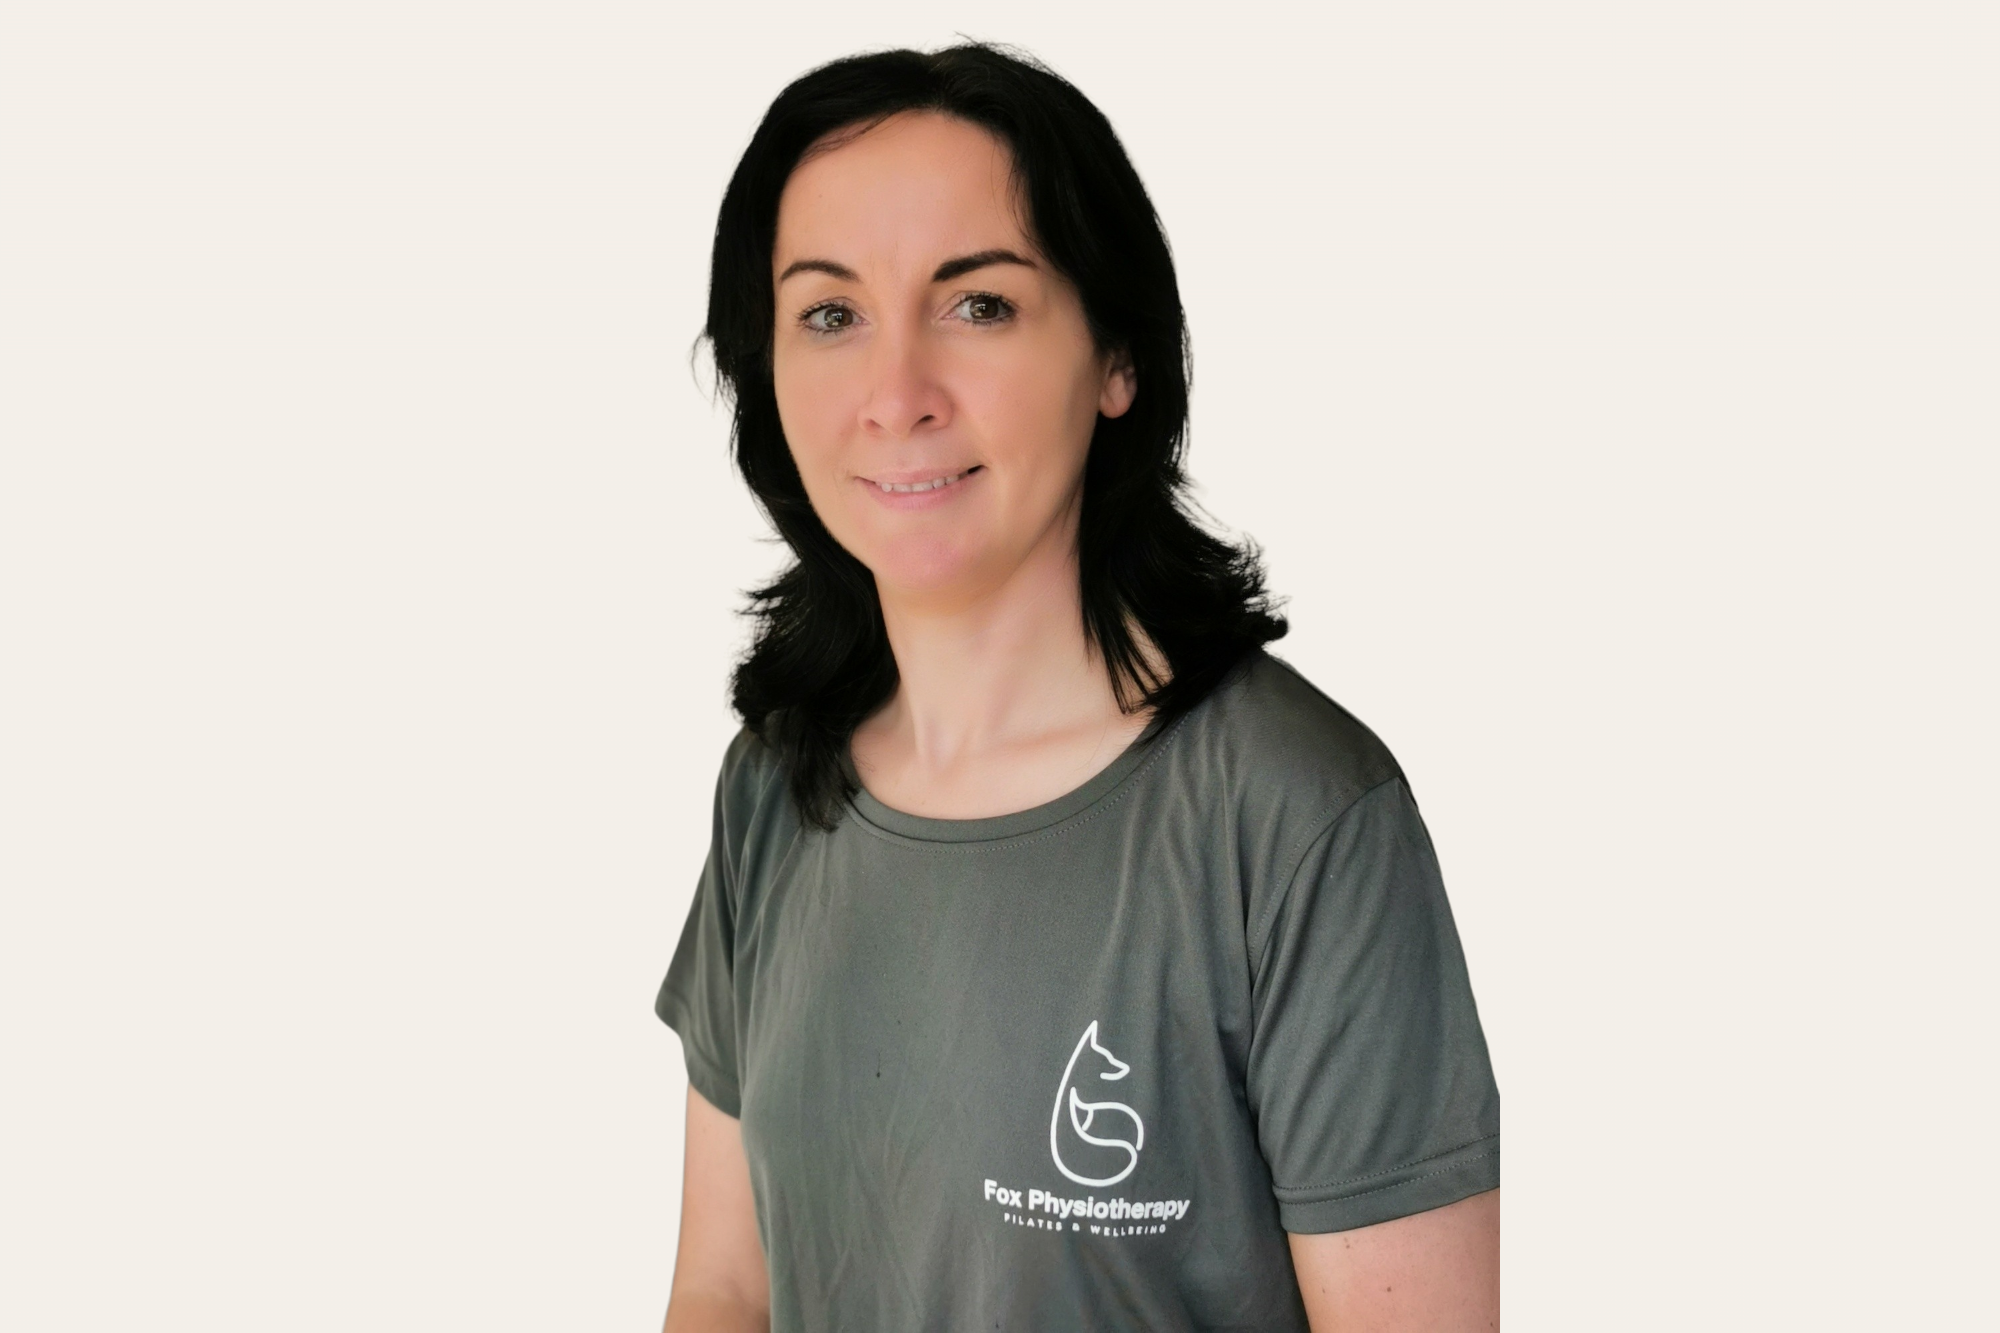 Chartered Physiotherapist teaching Pilates Classes